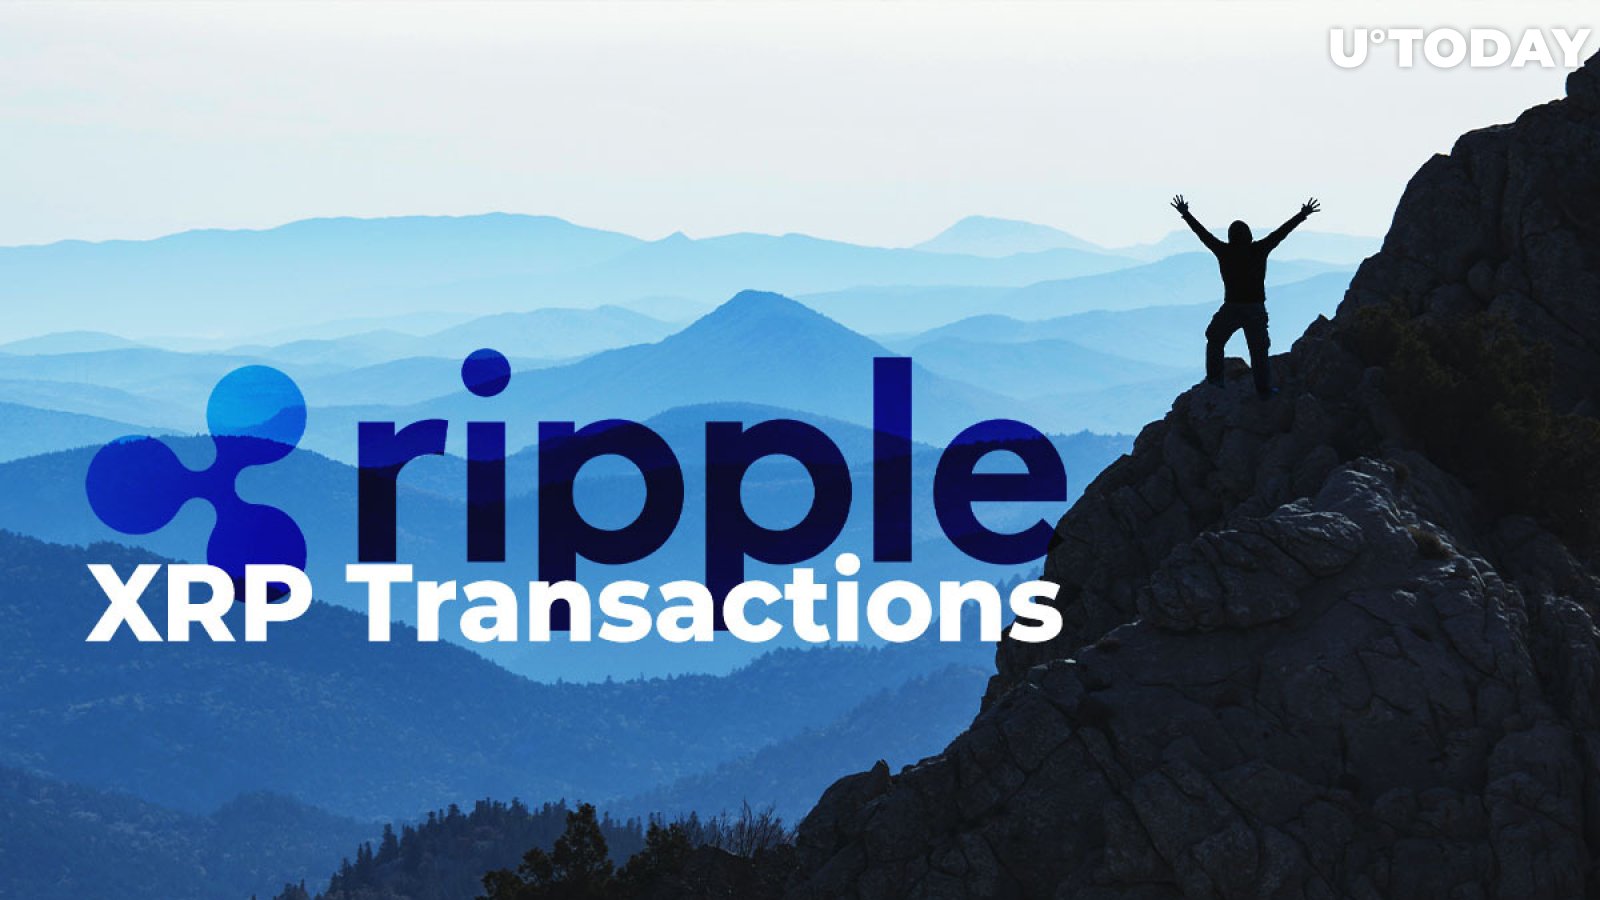 Ripple’s Top Exec: Growth in Number of XRP Transactions More Important Than Rise in Notional Volume